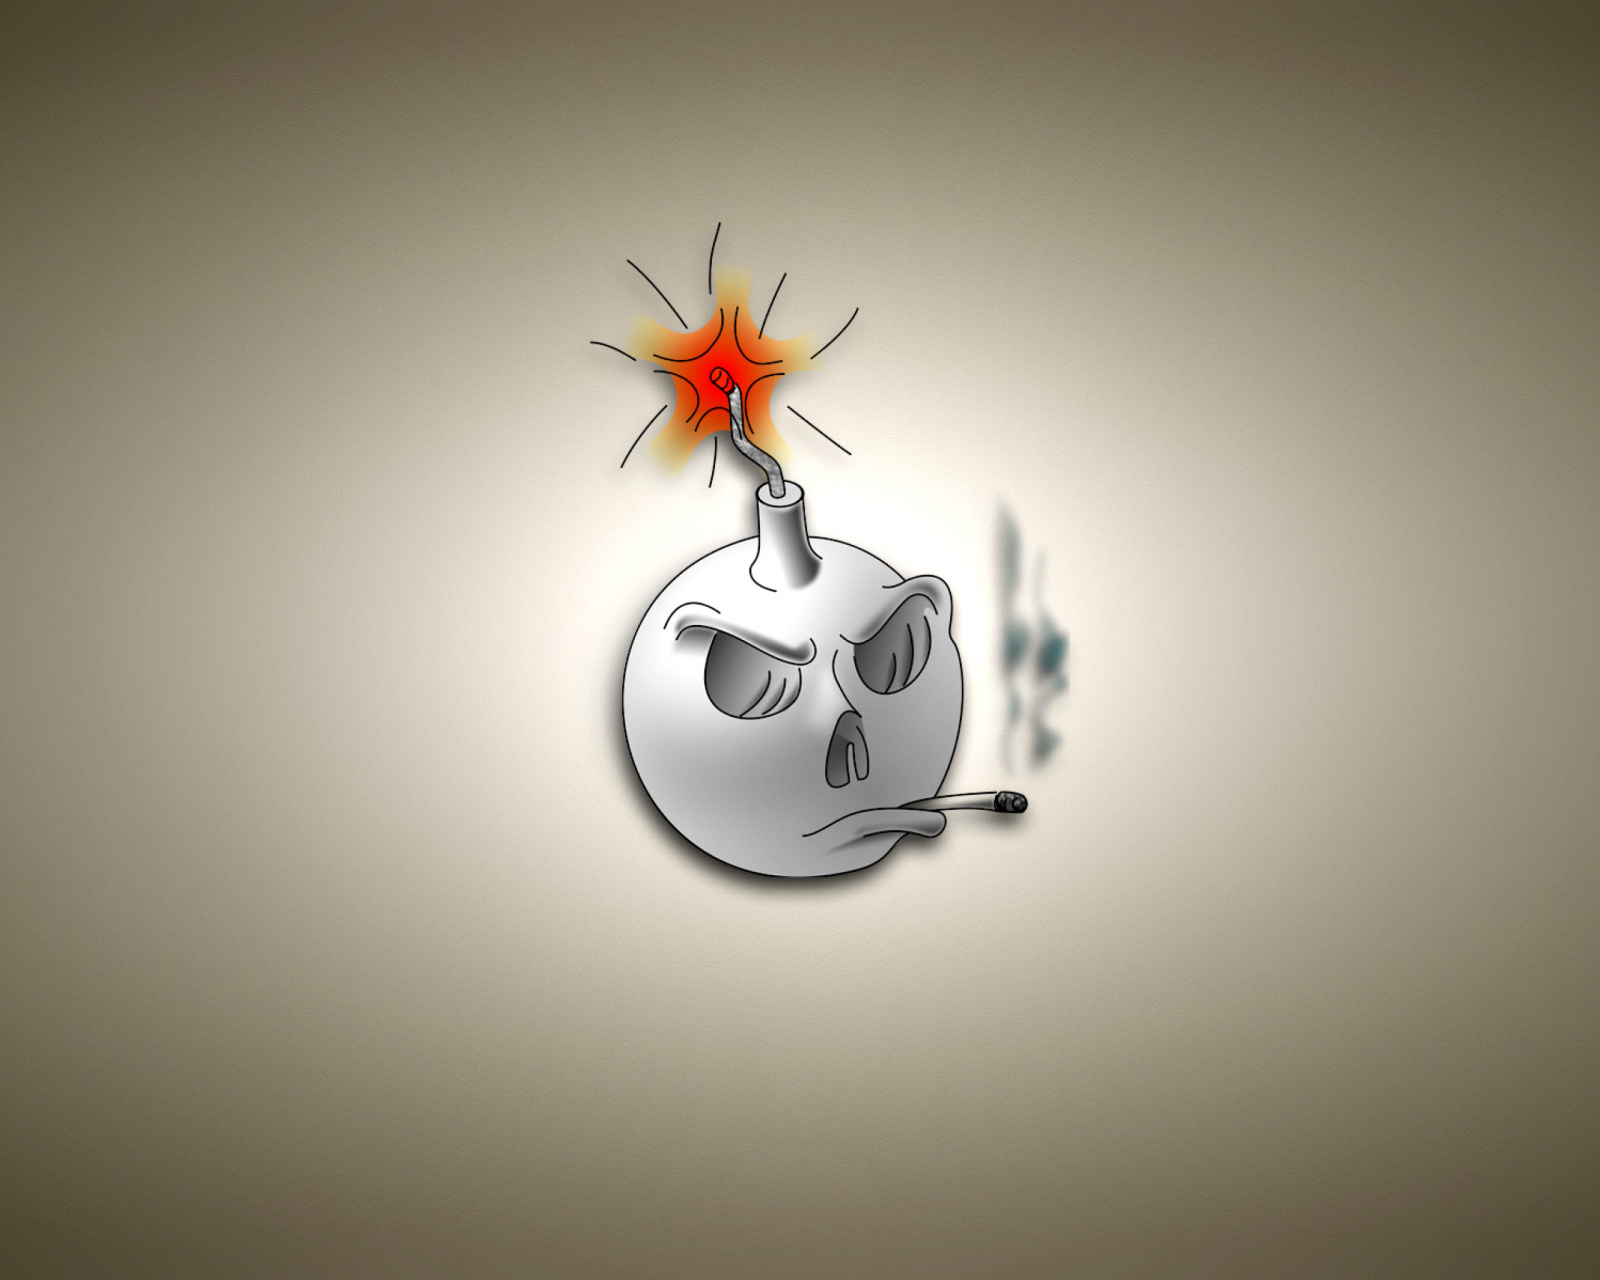 Bomb with Wick wallpaper 1600x1280